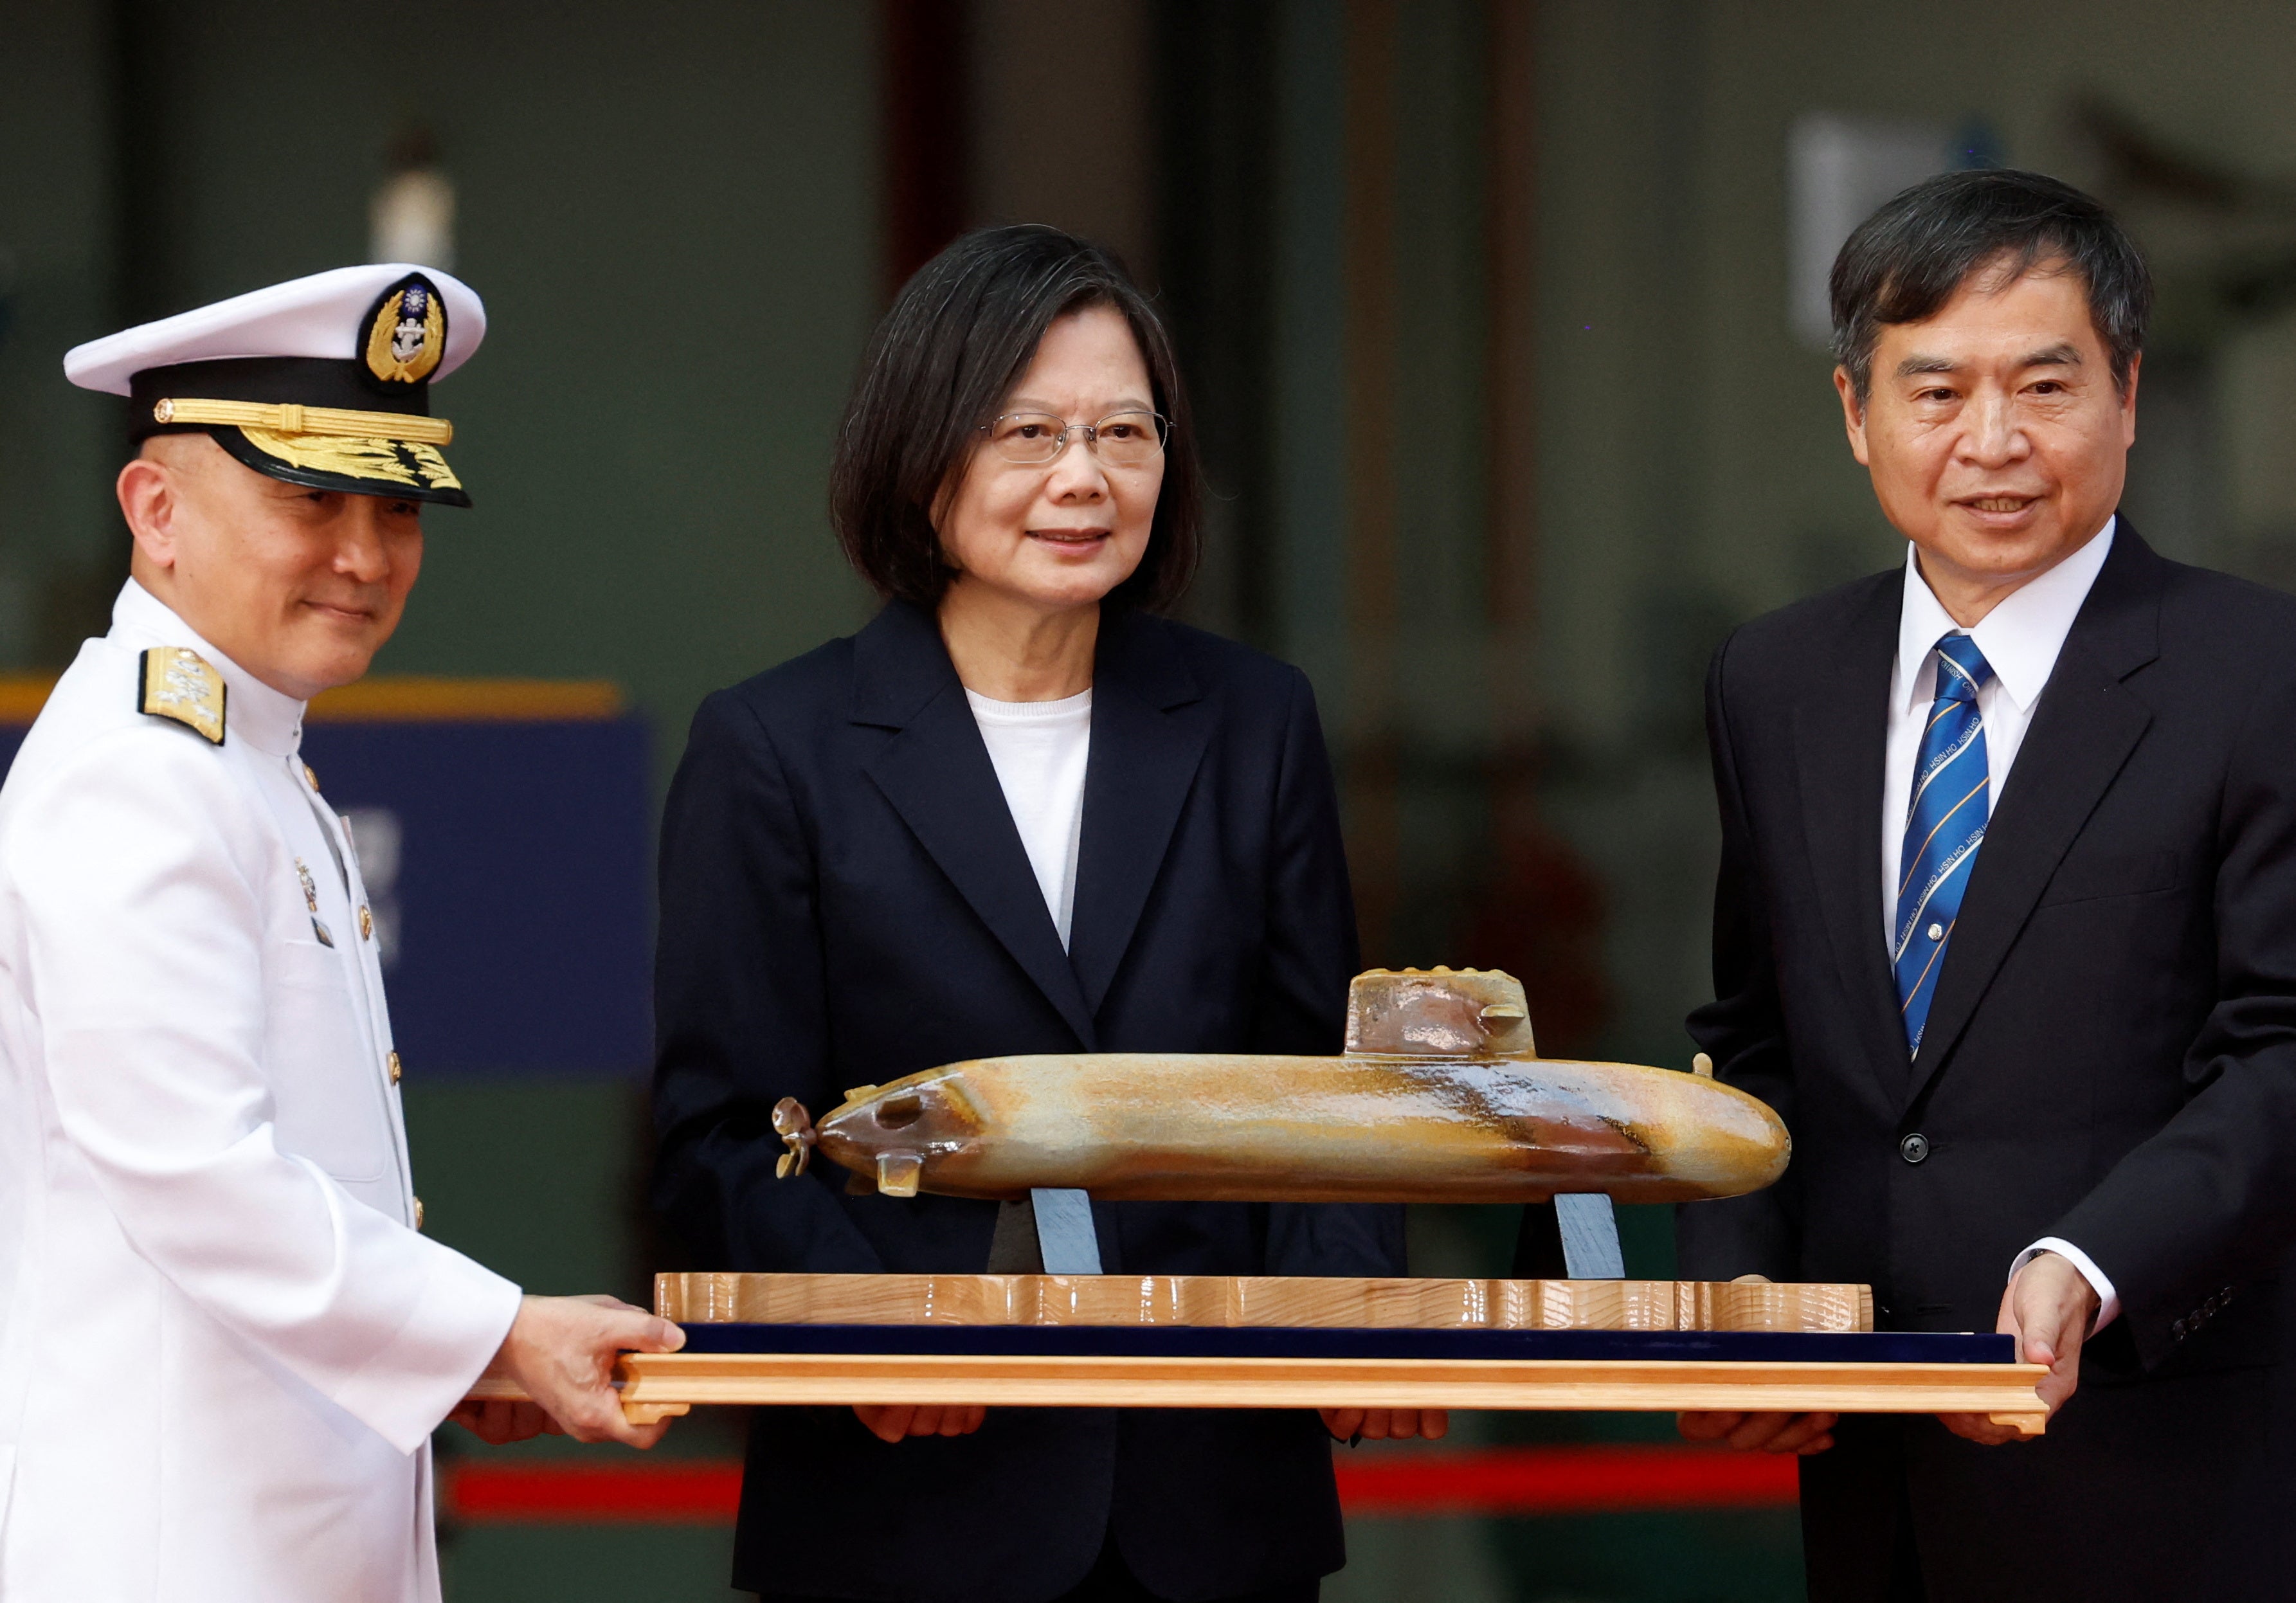 Taiwan's president Tsai Ing-wen poses for a photo with CSBC Corporation chair Cheng Wen-lon while holding a scale model of Haikun